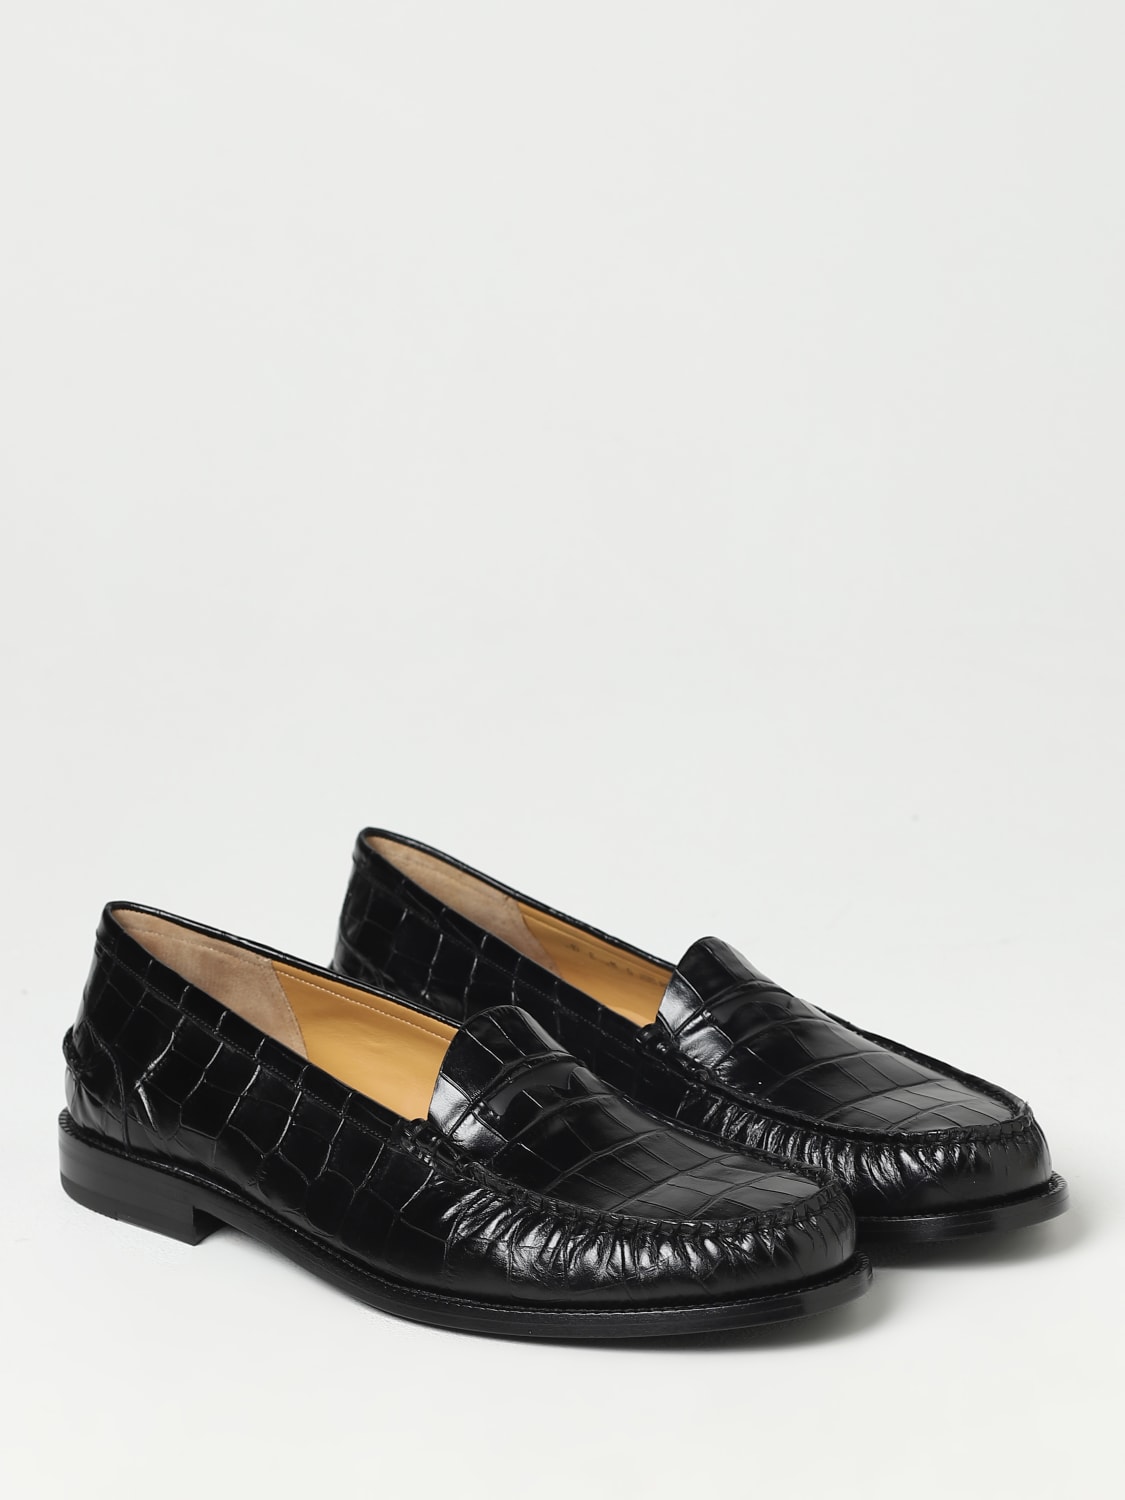 BALLY: moccasins in croco print leather - Black | Bally loafers ...